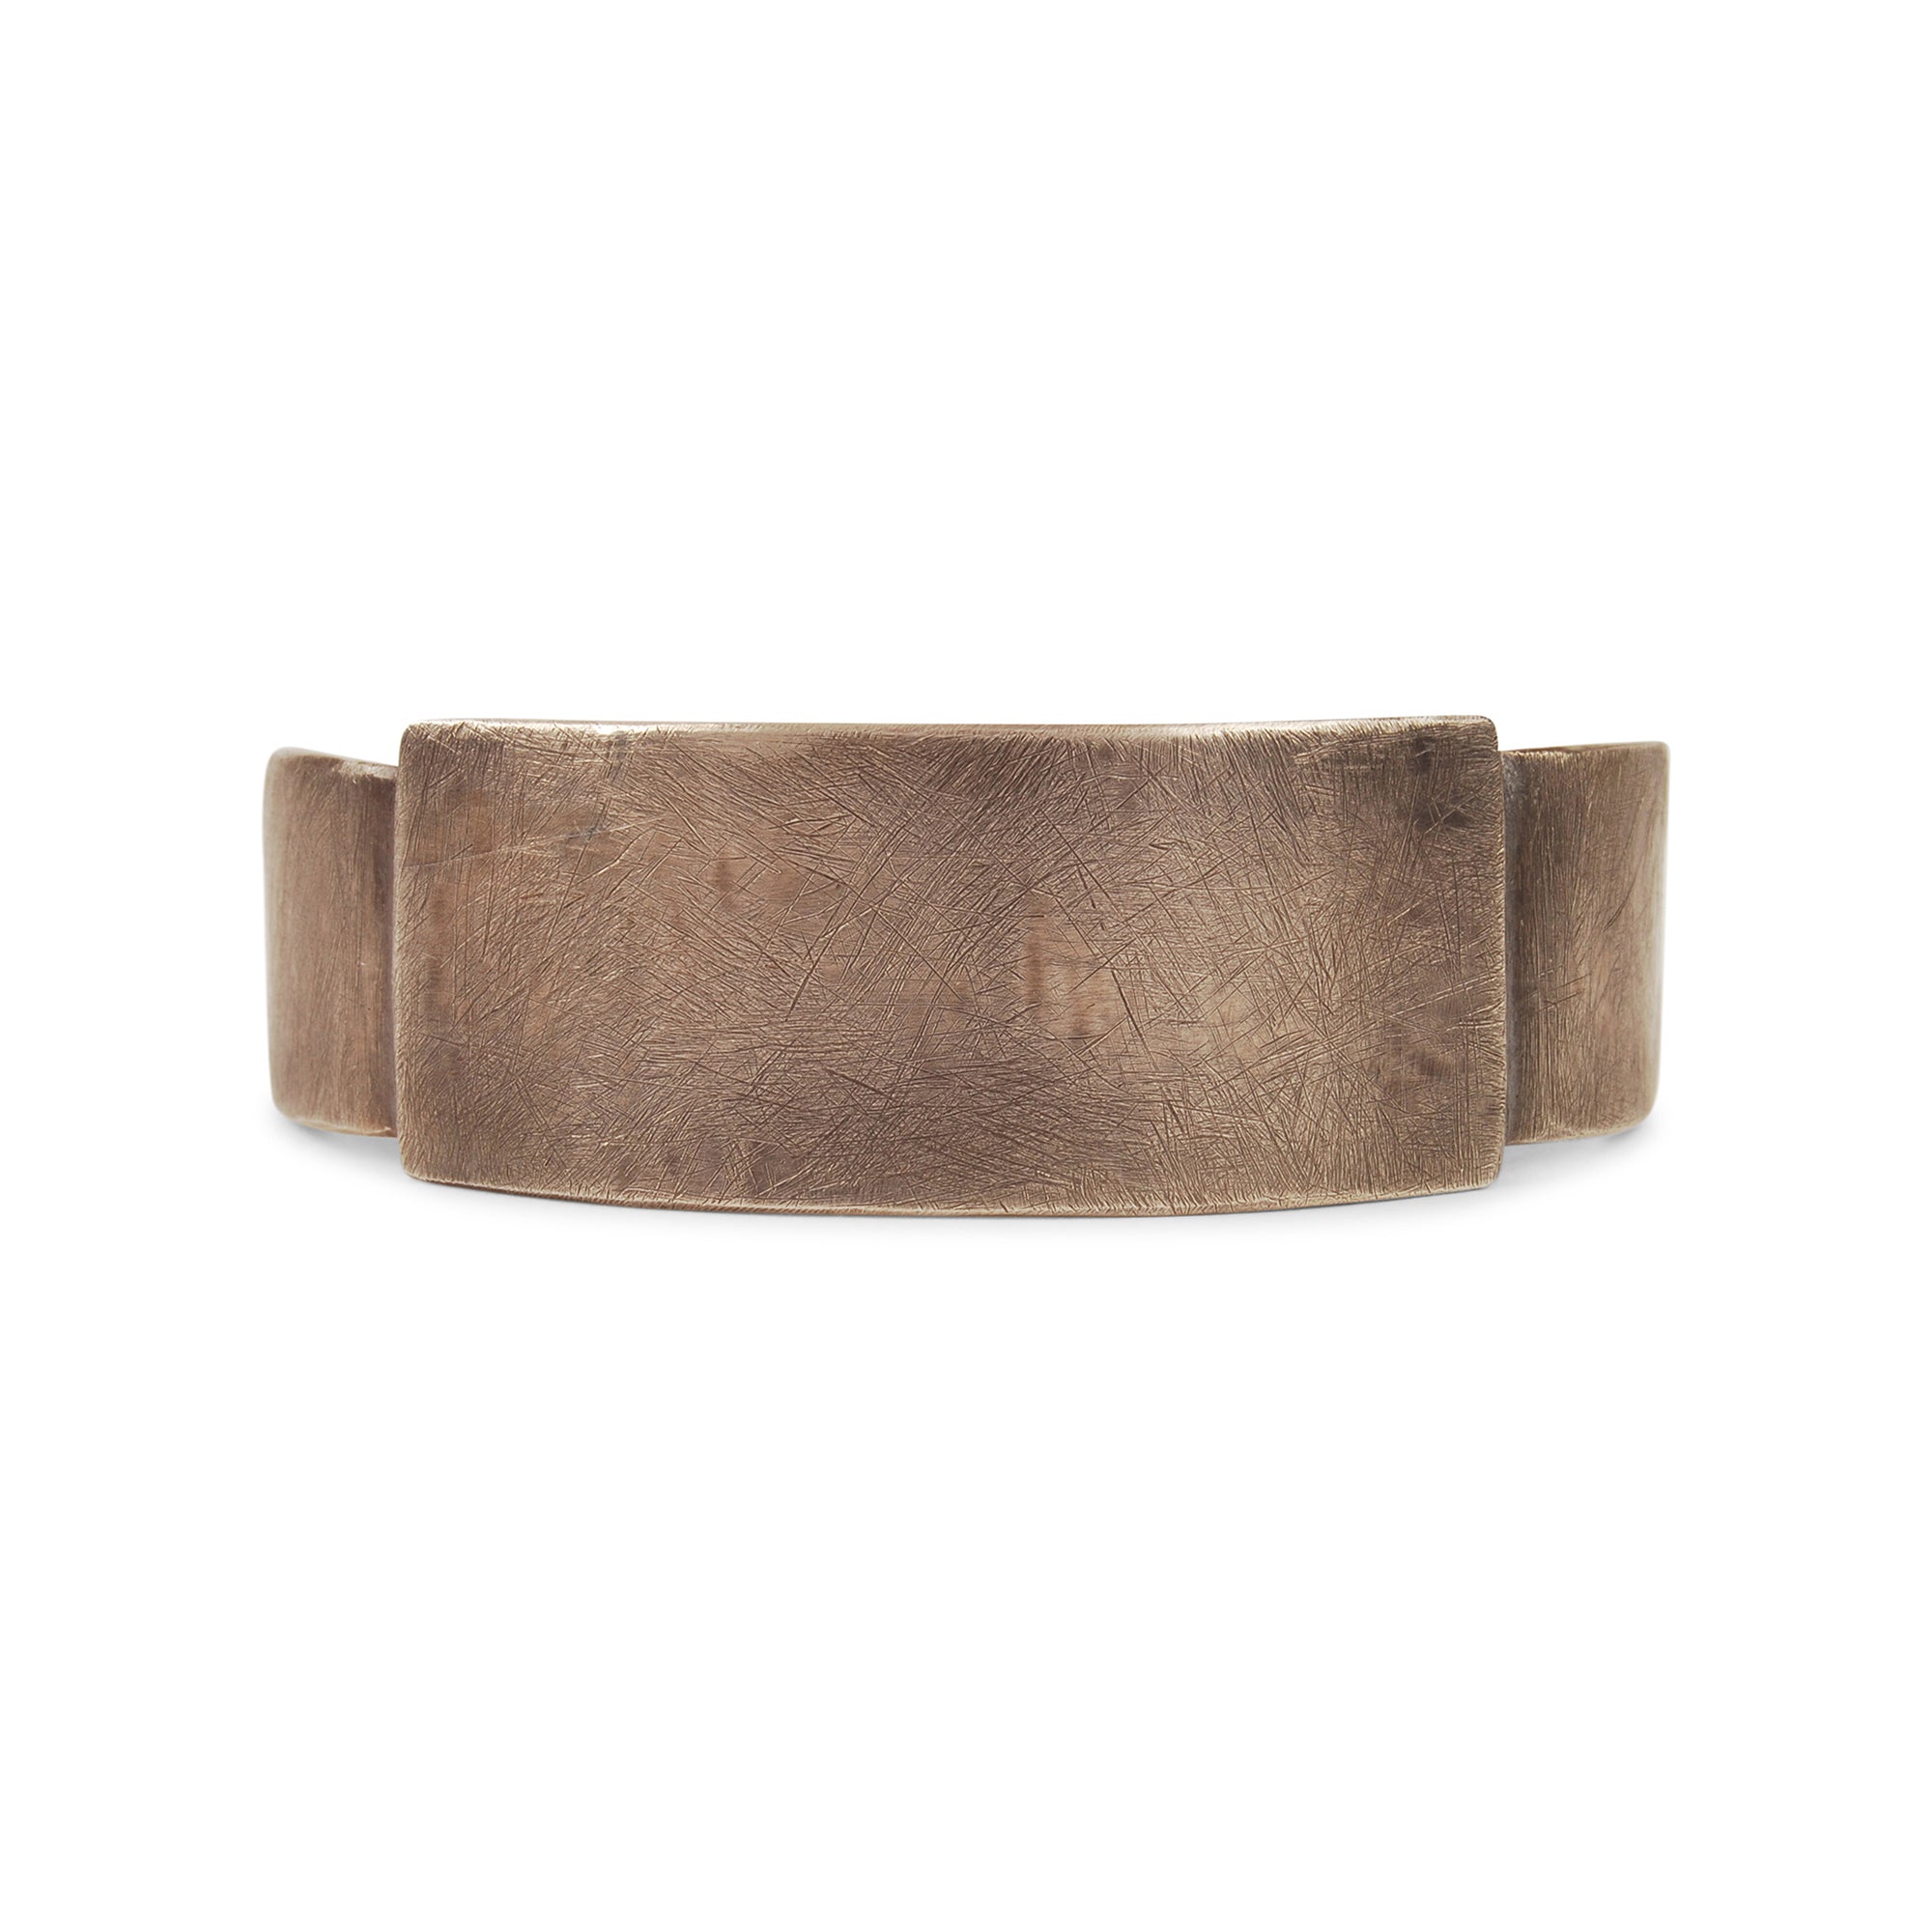 The Grit Wide Stepped Cuff is crafted in sterling silver, featuring a rough-hewn texture and oxidation